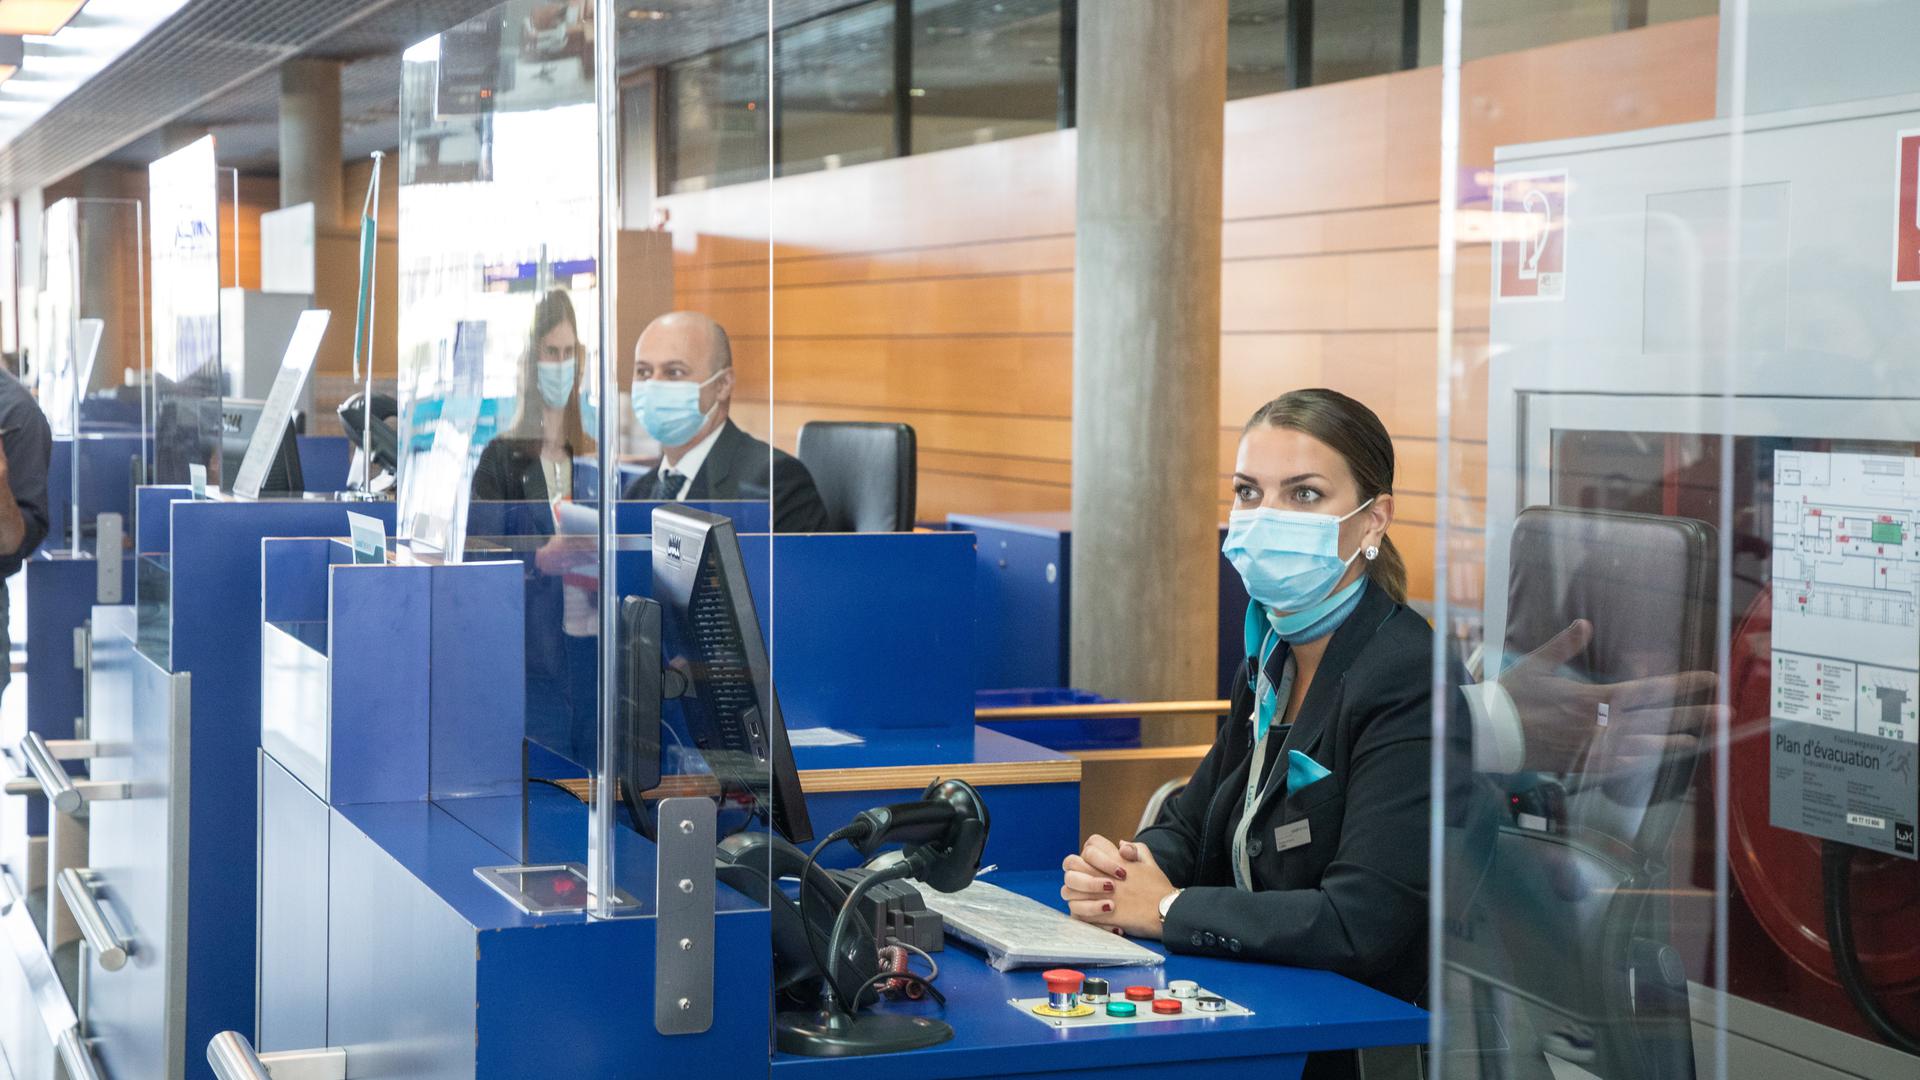 Luxair staff at Luxembourg airport during the 2020 Covid-19 pandemic